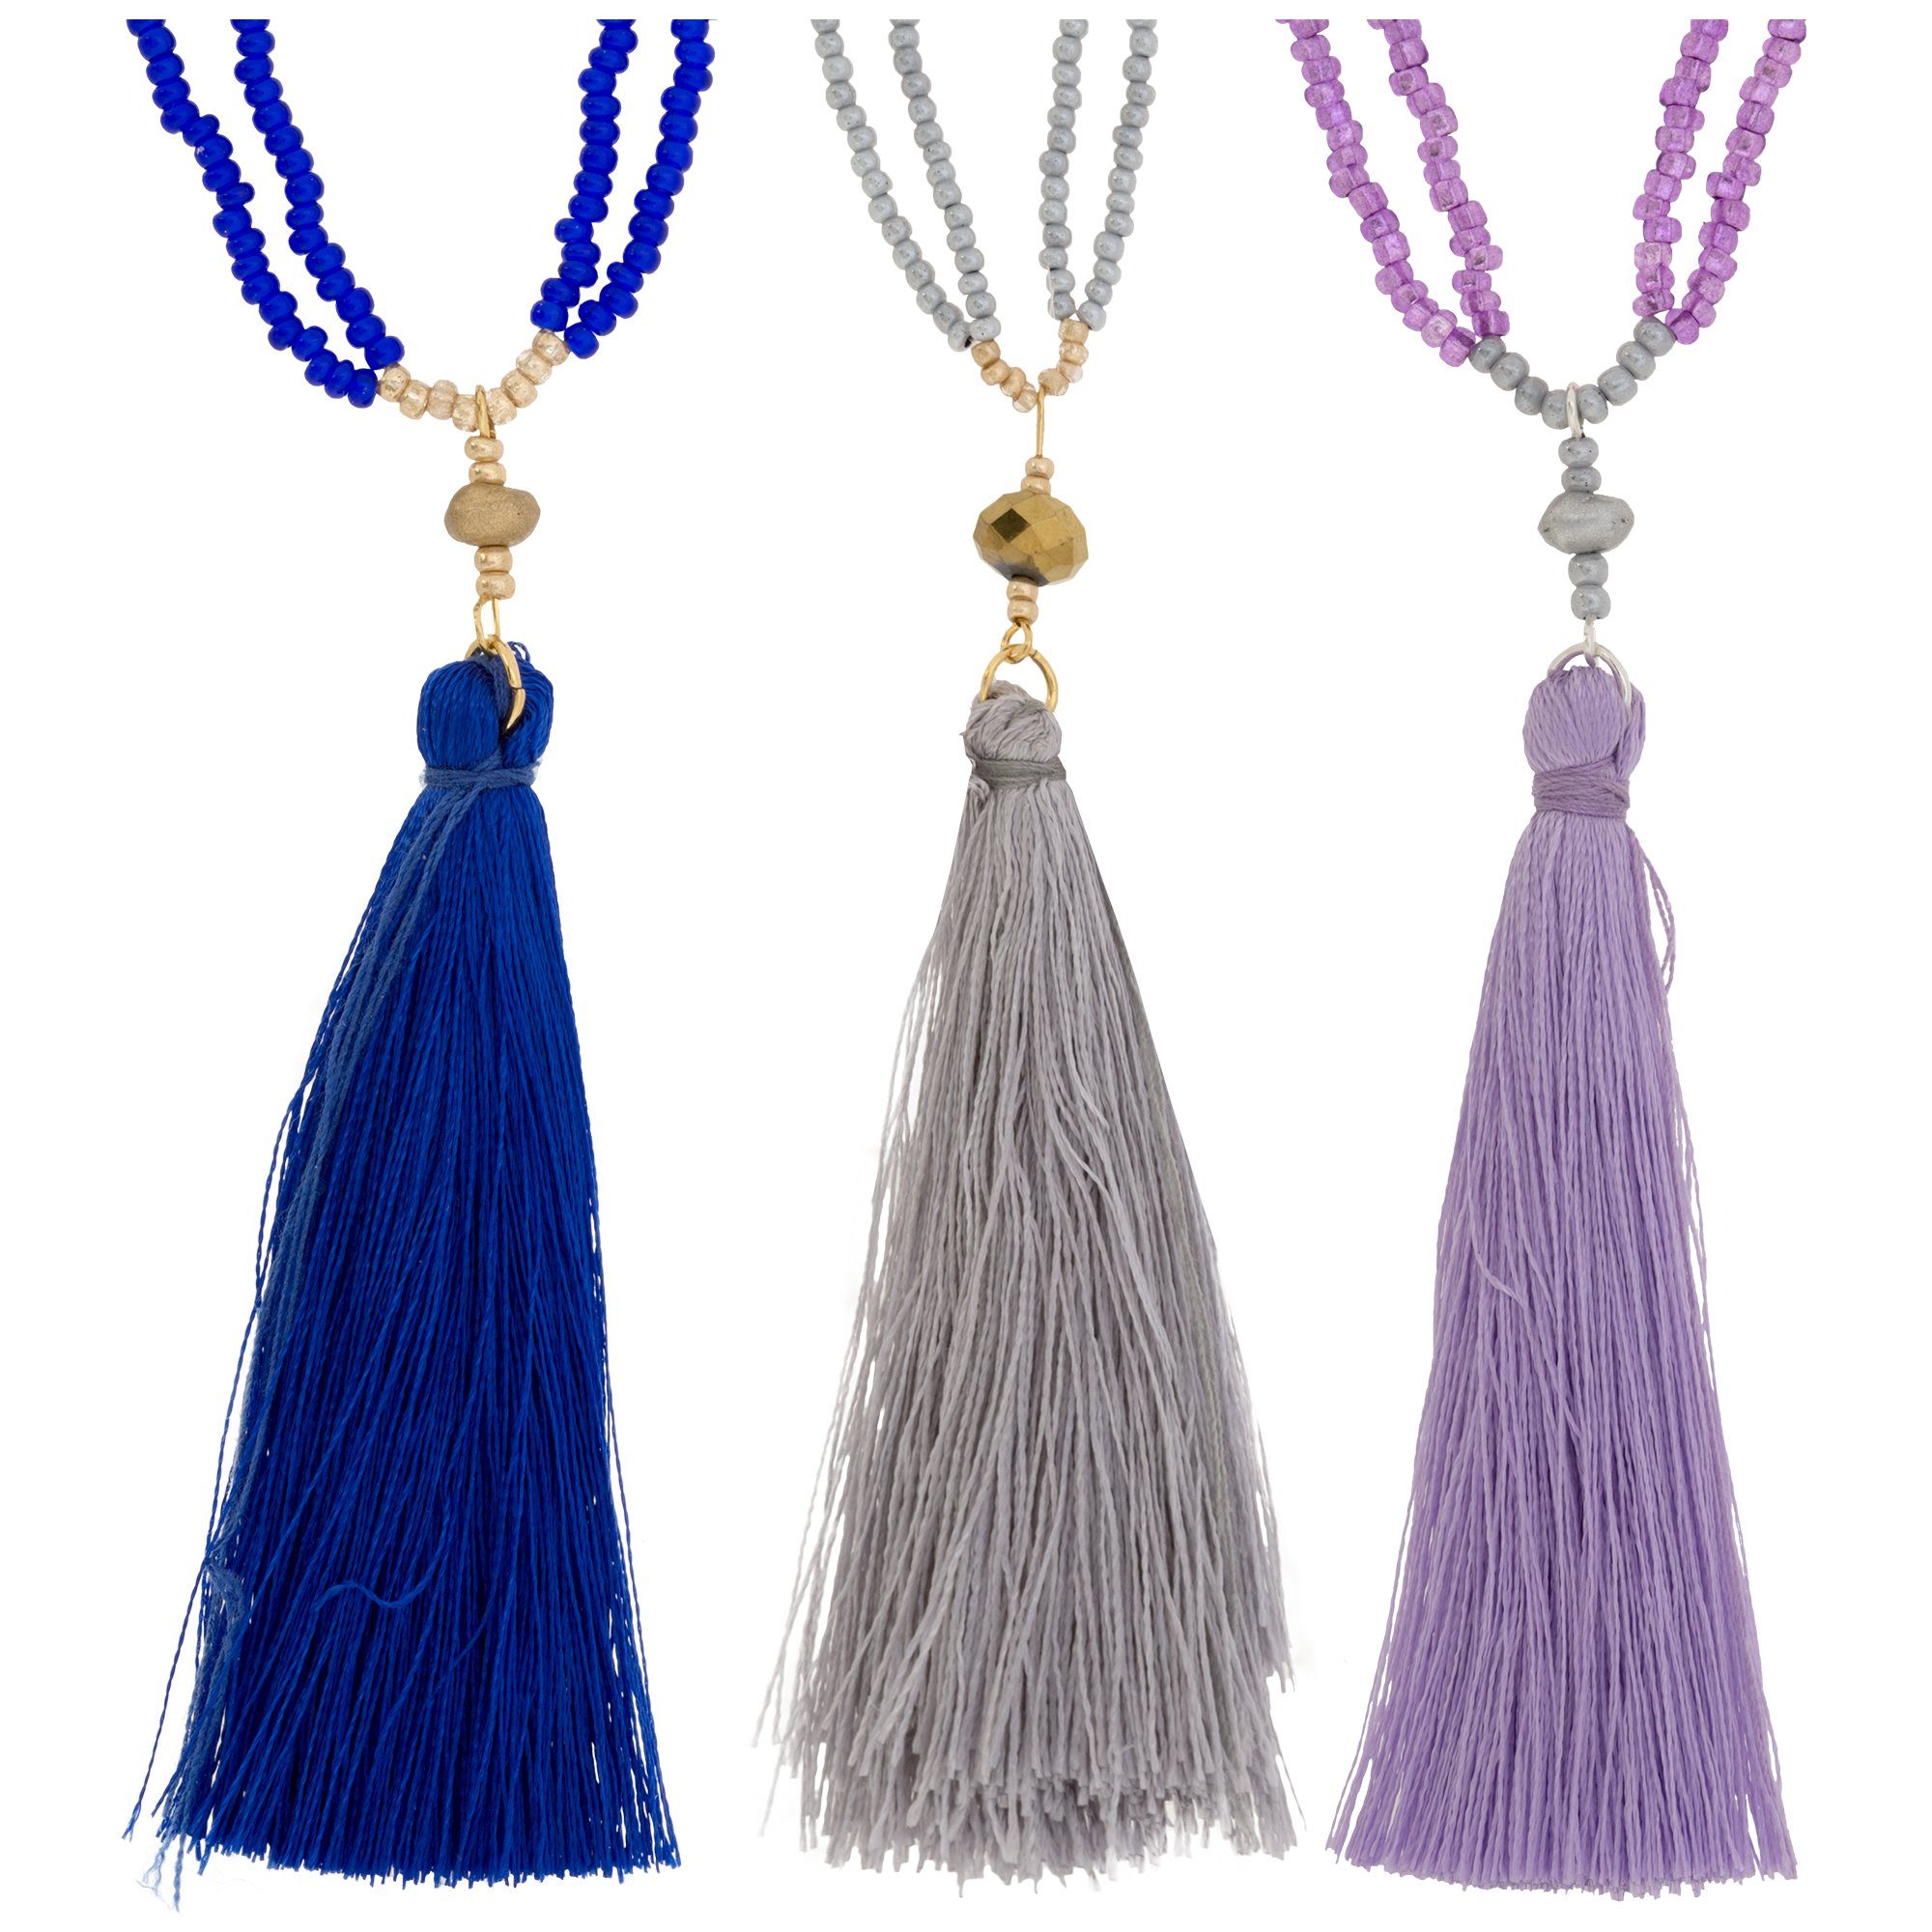 Ombre Tassel Necklace - Blue